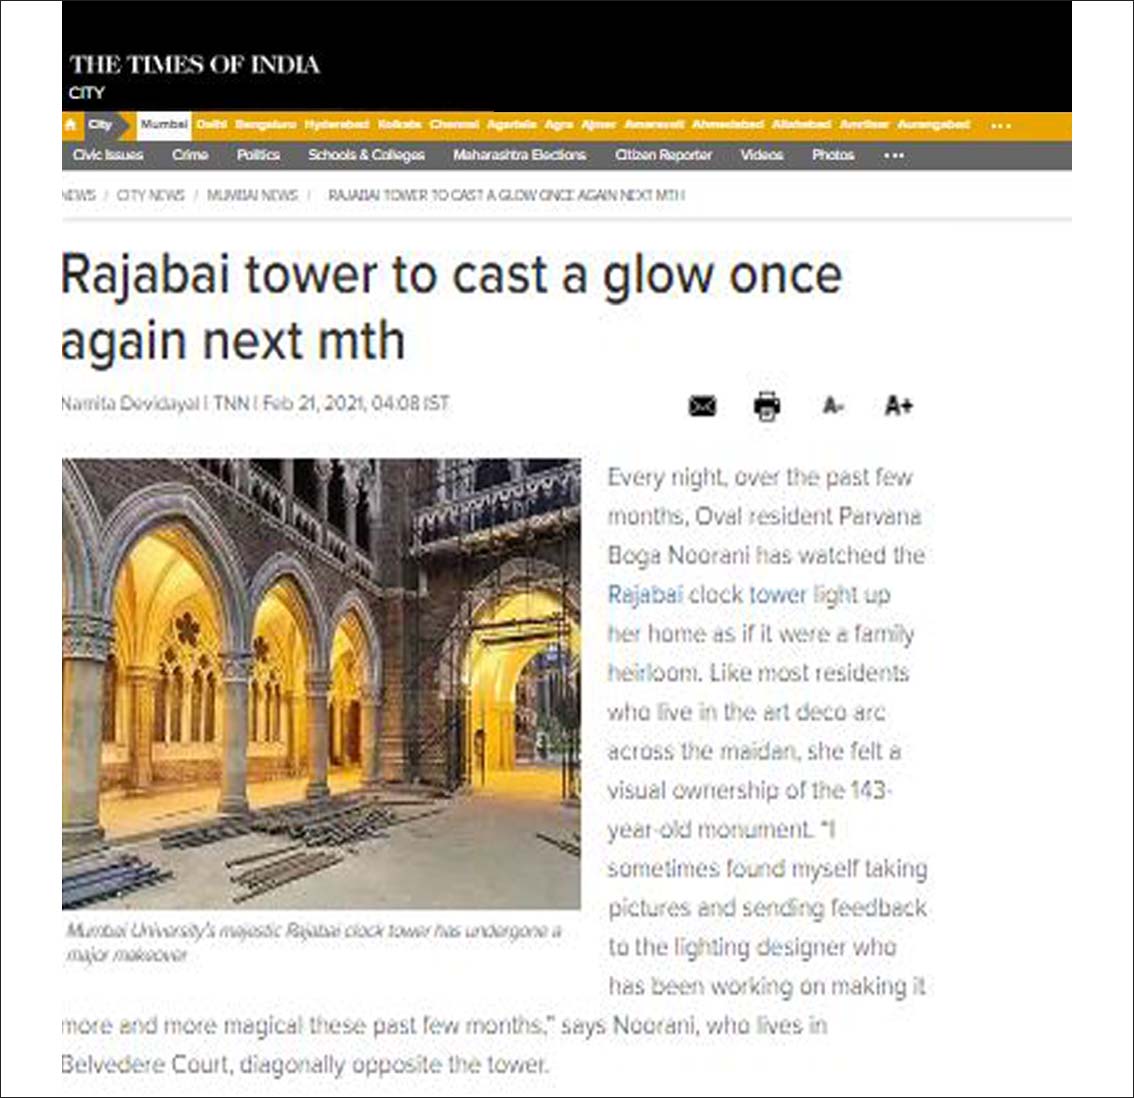 Rajabai tower to cast a glow once again next month, Time of India